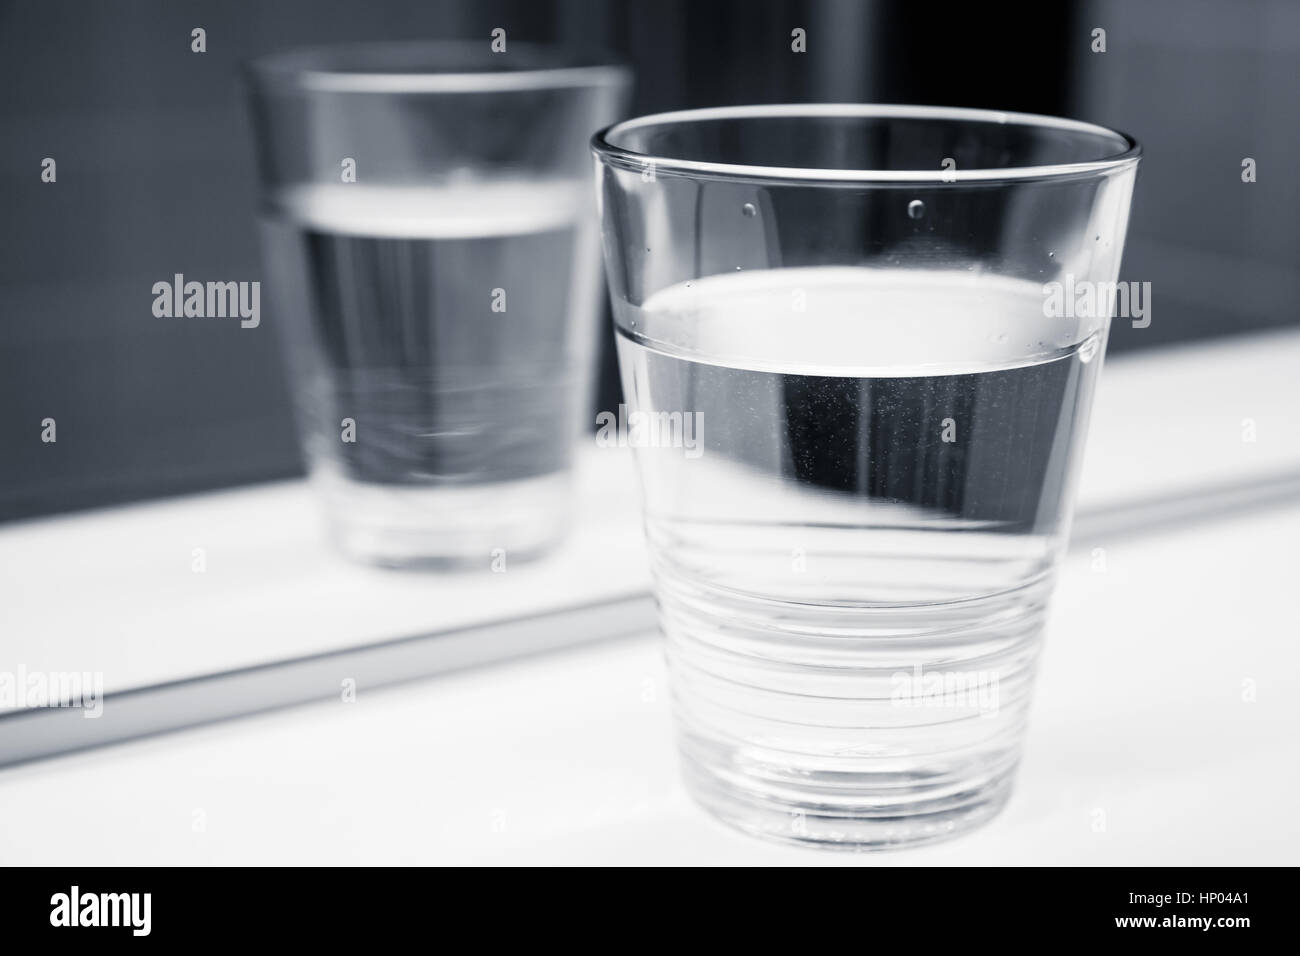 Glass of water stand on white shelf near the mirror, black and white close-up photo Stock Photo